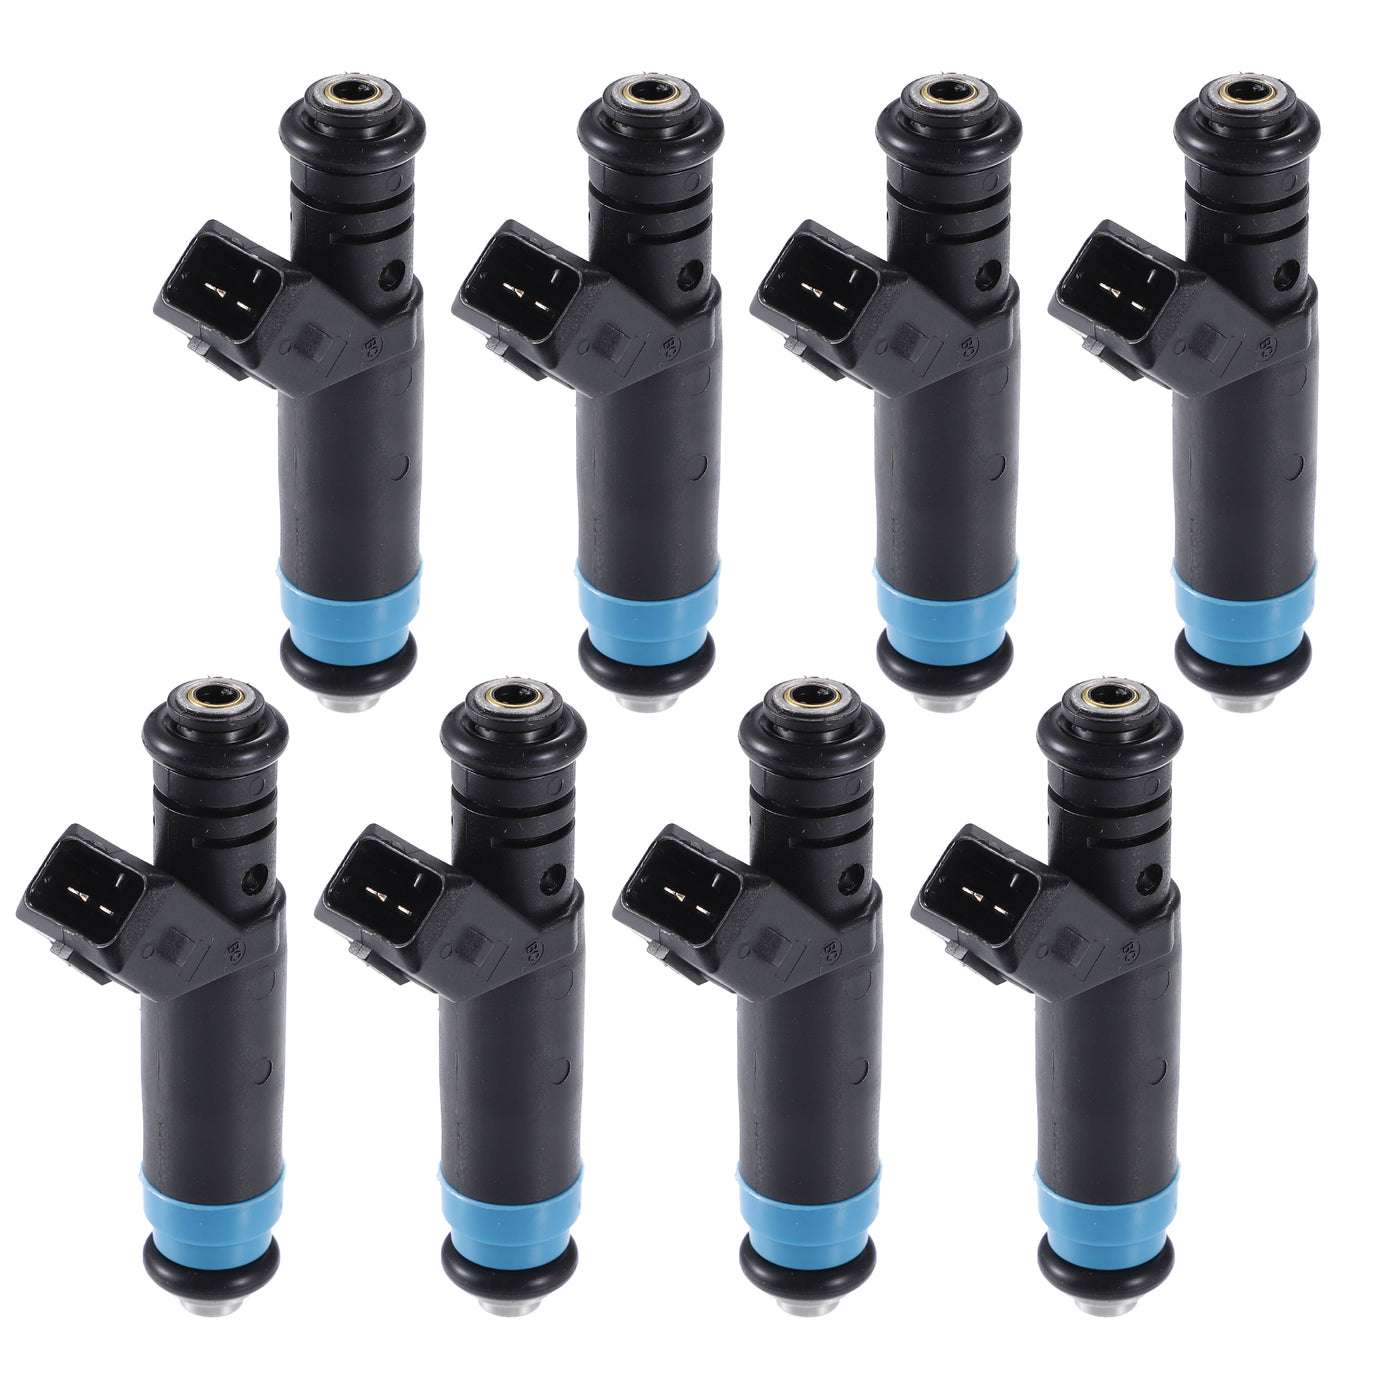 ACROPIX Car Fuel Injector Nozzle Replacement for Ford for Mustang GT 1996-2004 FI114992 - Pack of 8